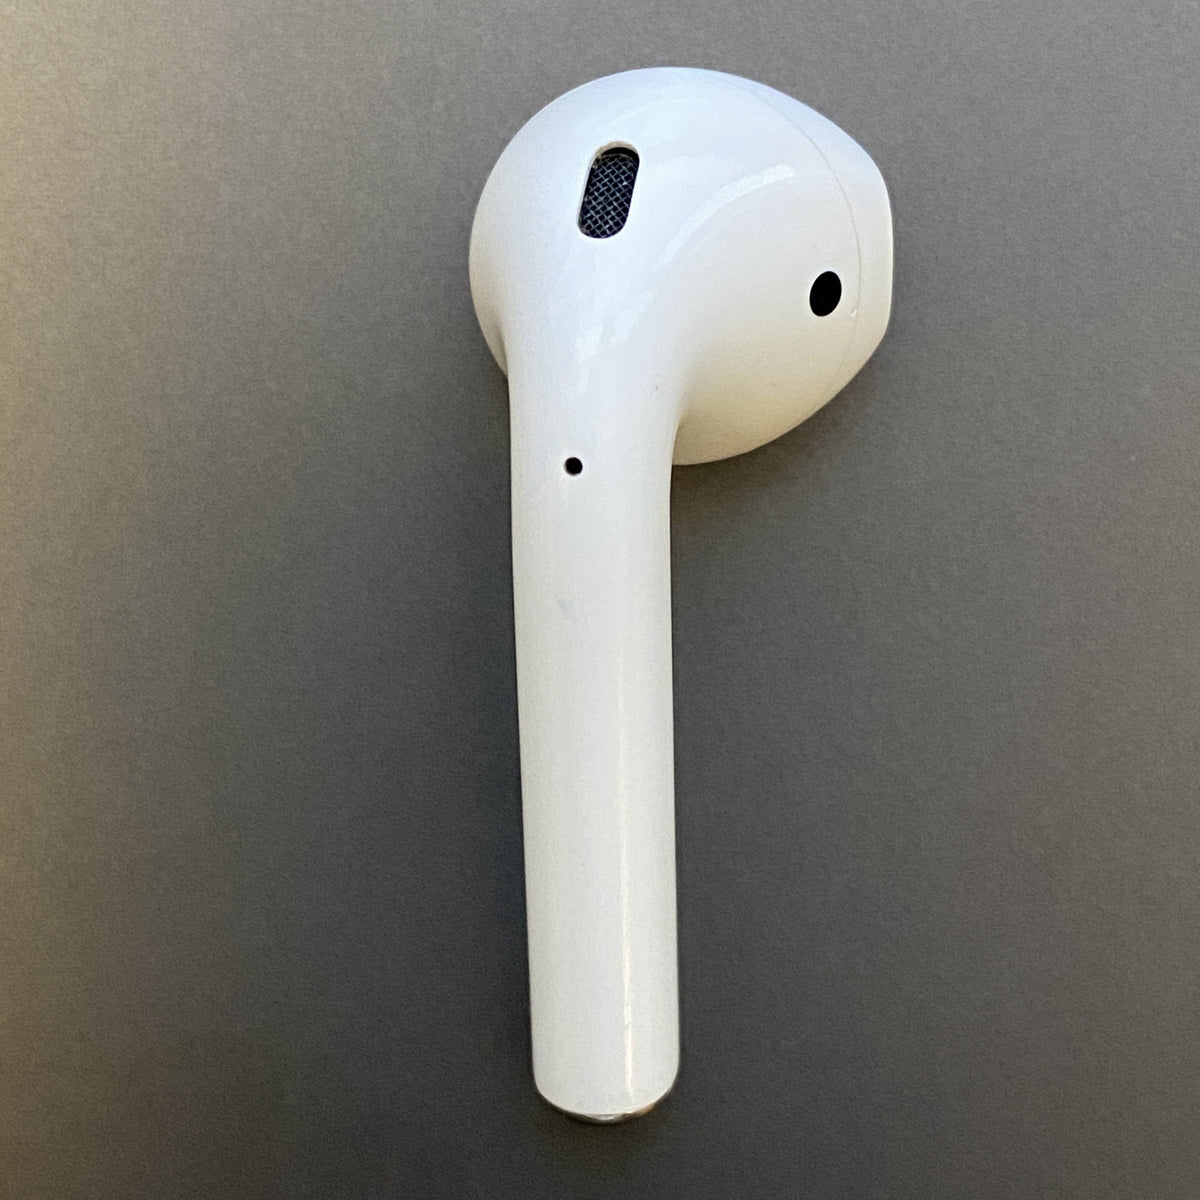 airpod replacement tips